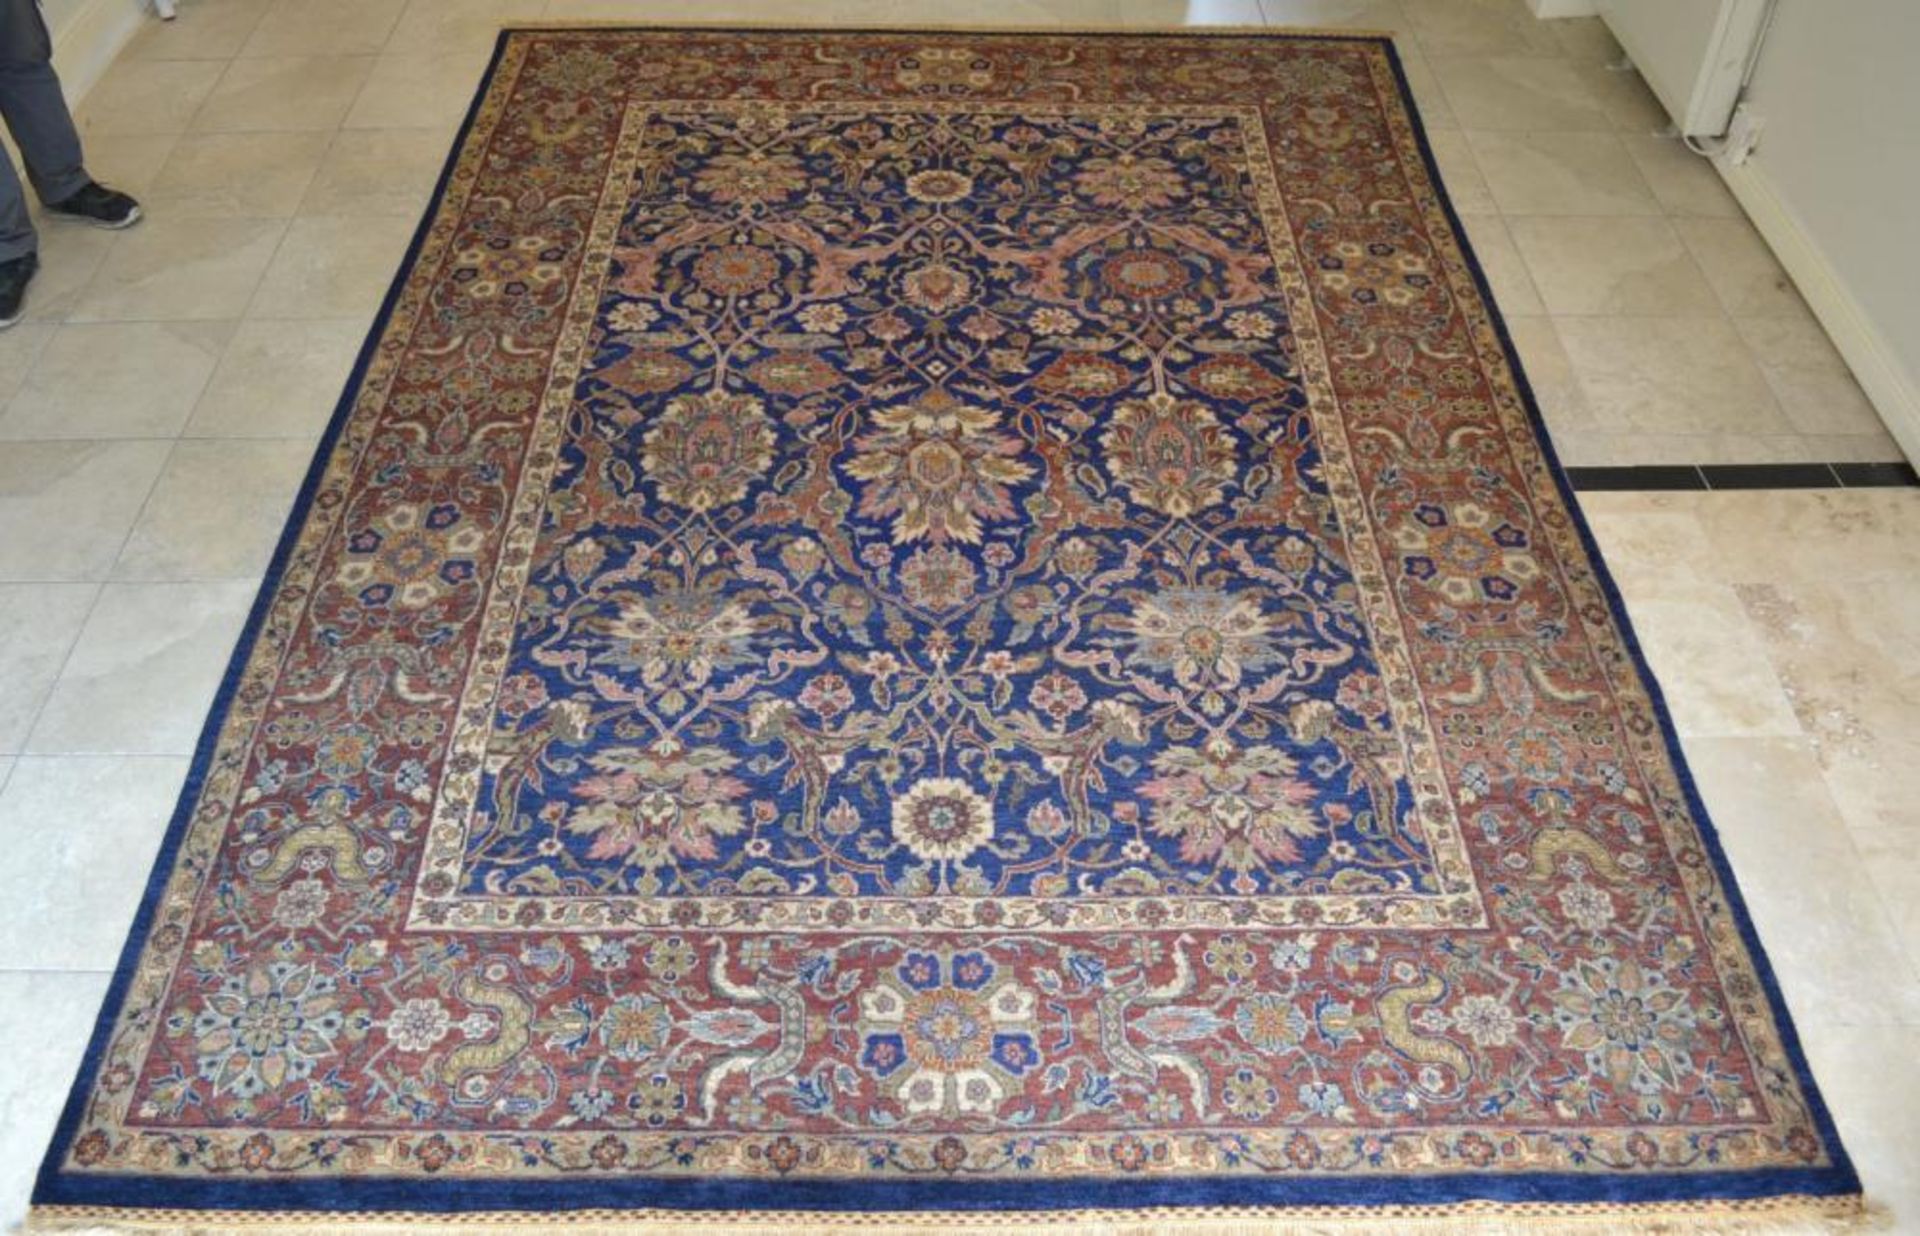 1 x Fine Indian Vegetable Dyed Handmade Carpet in Navy and Rust - All Wool With Cotton Foundation - - Image 2 of 22